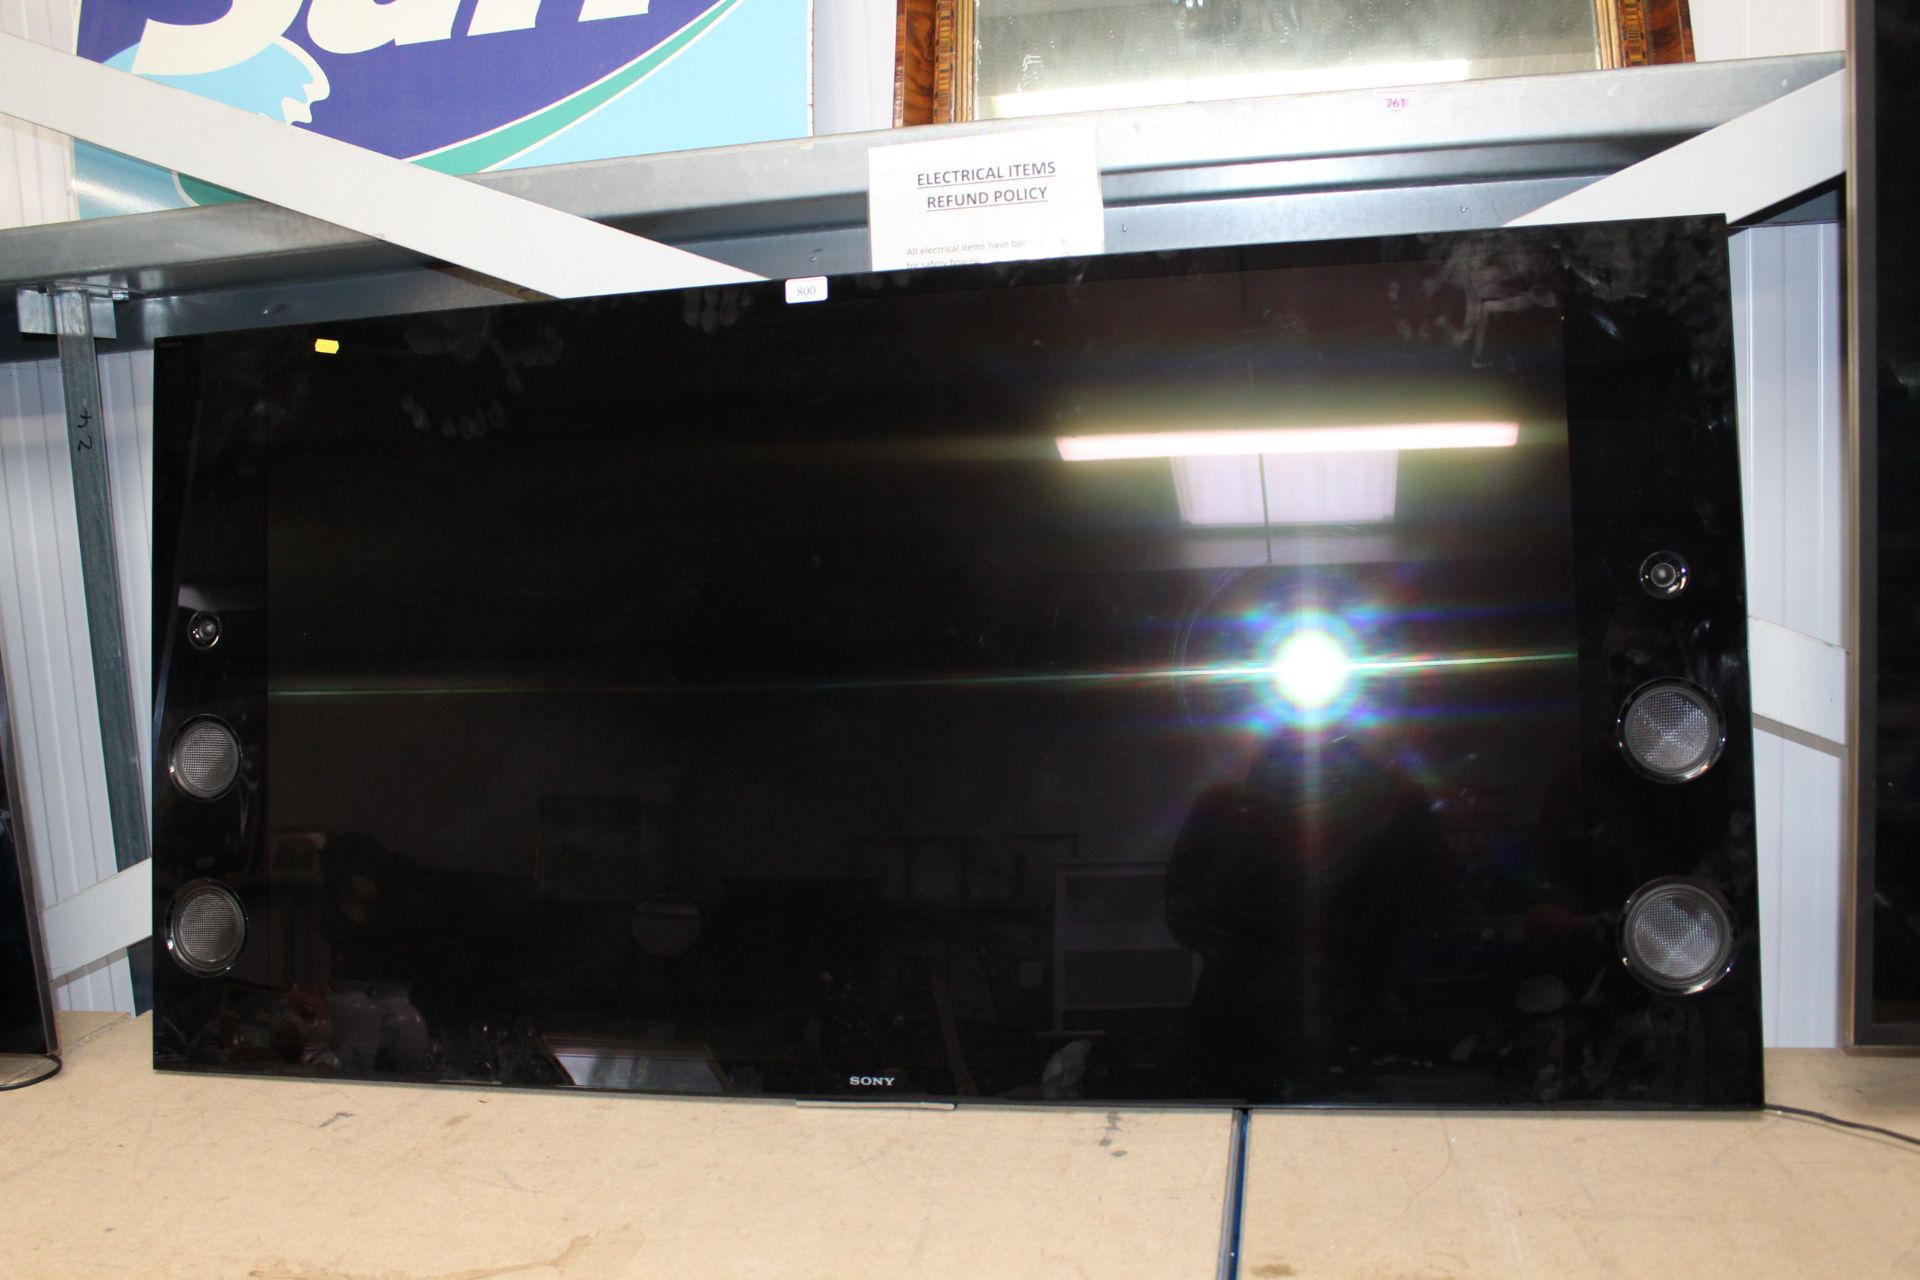 A Sony flat screen television Model KD-55X9305C wi